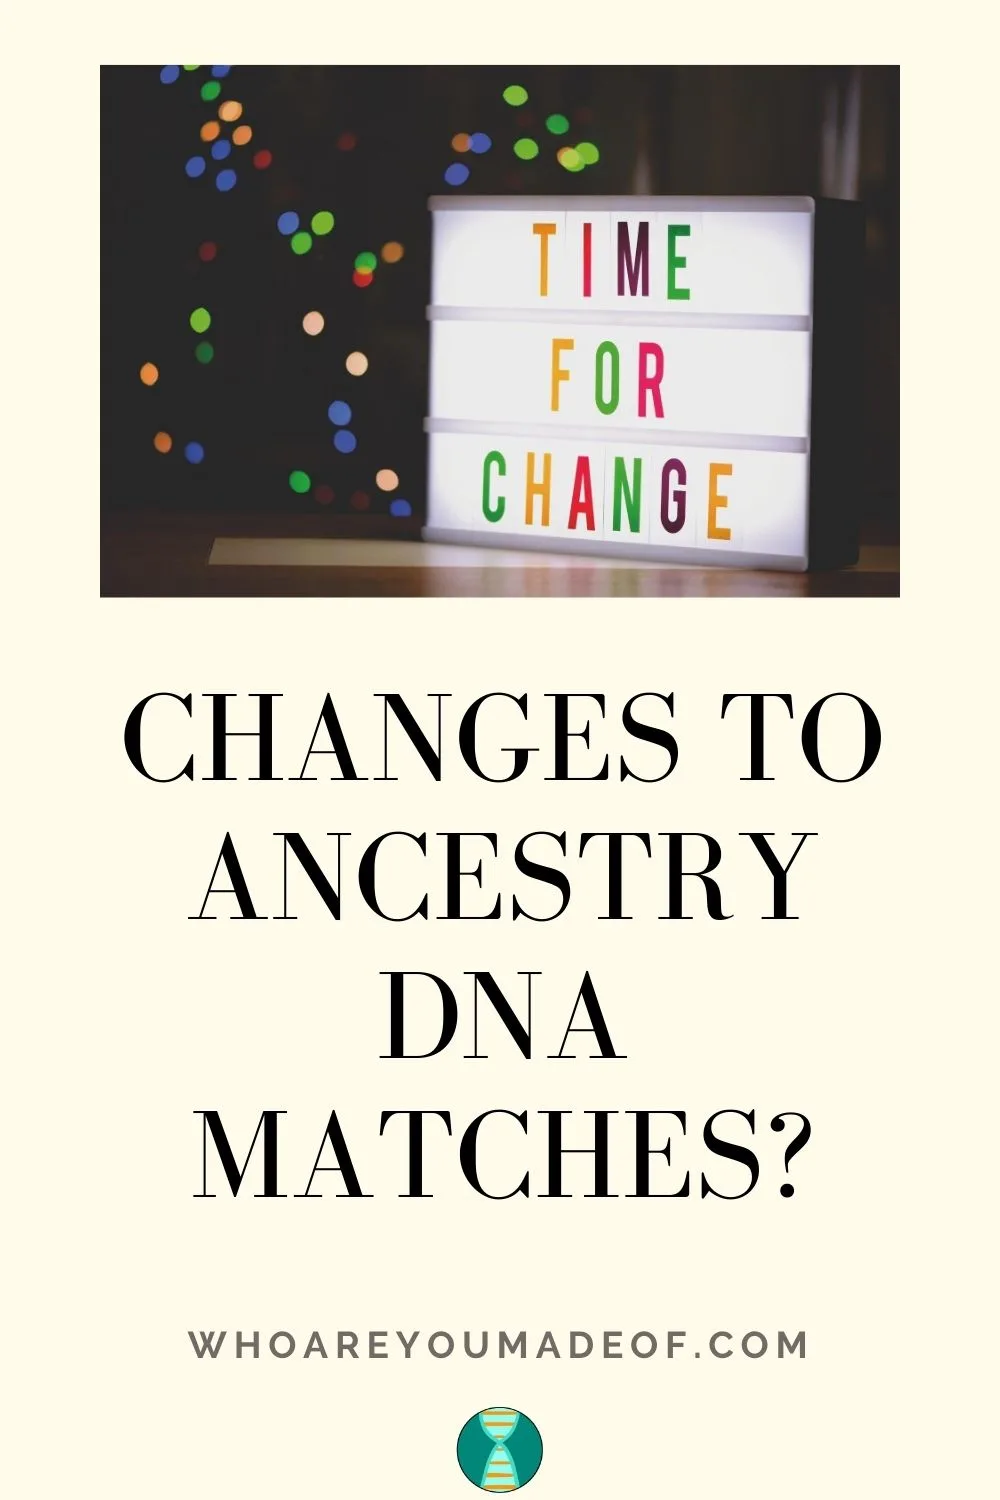 Changes to Ancestry DNA Matches Pinterest Optimized Image